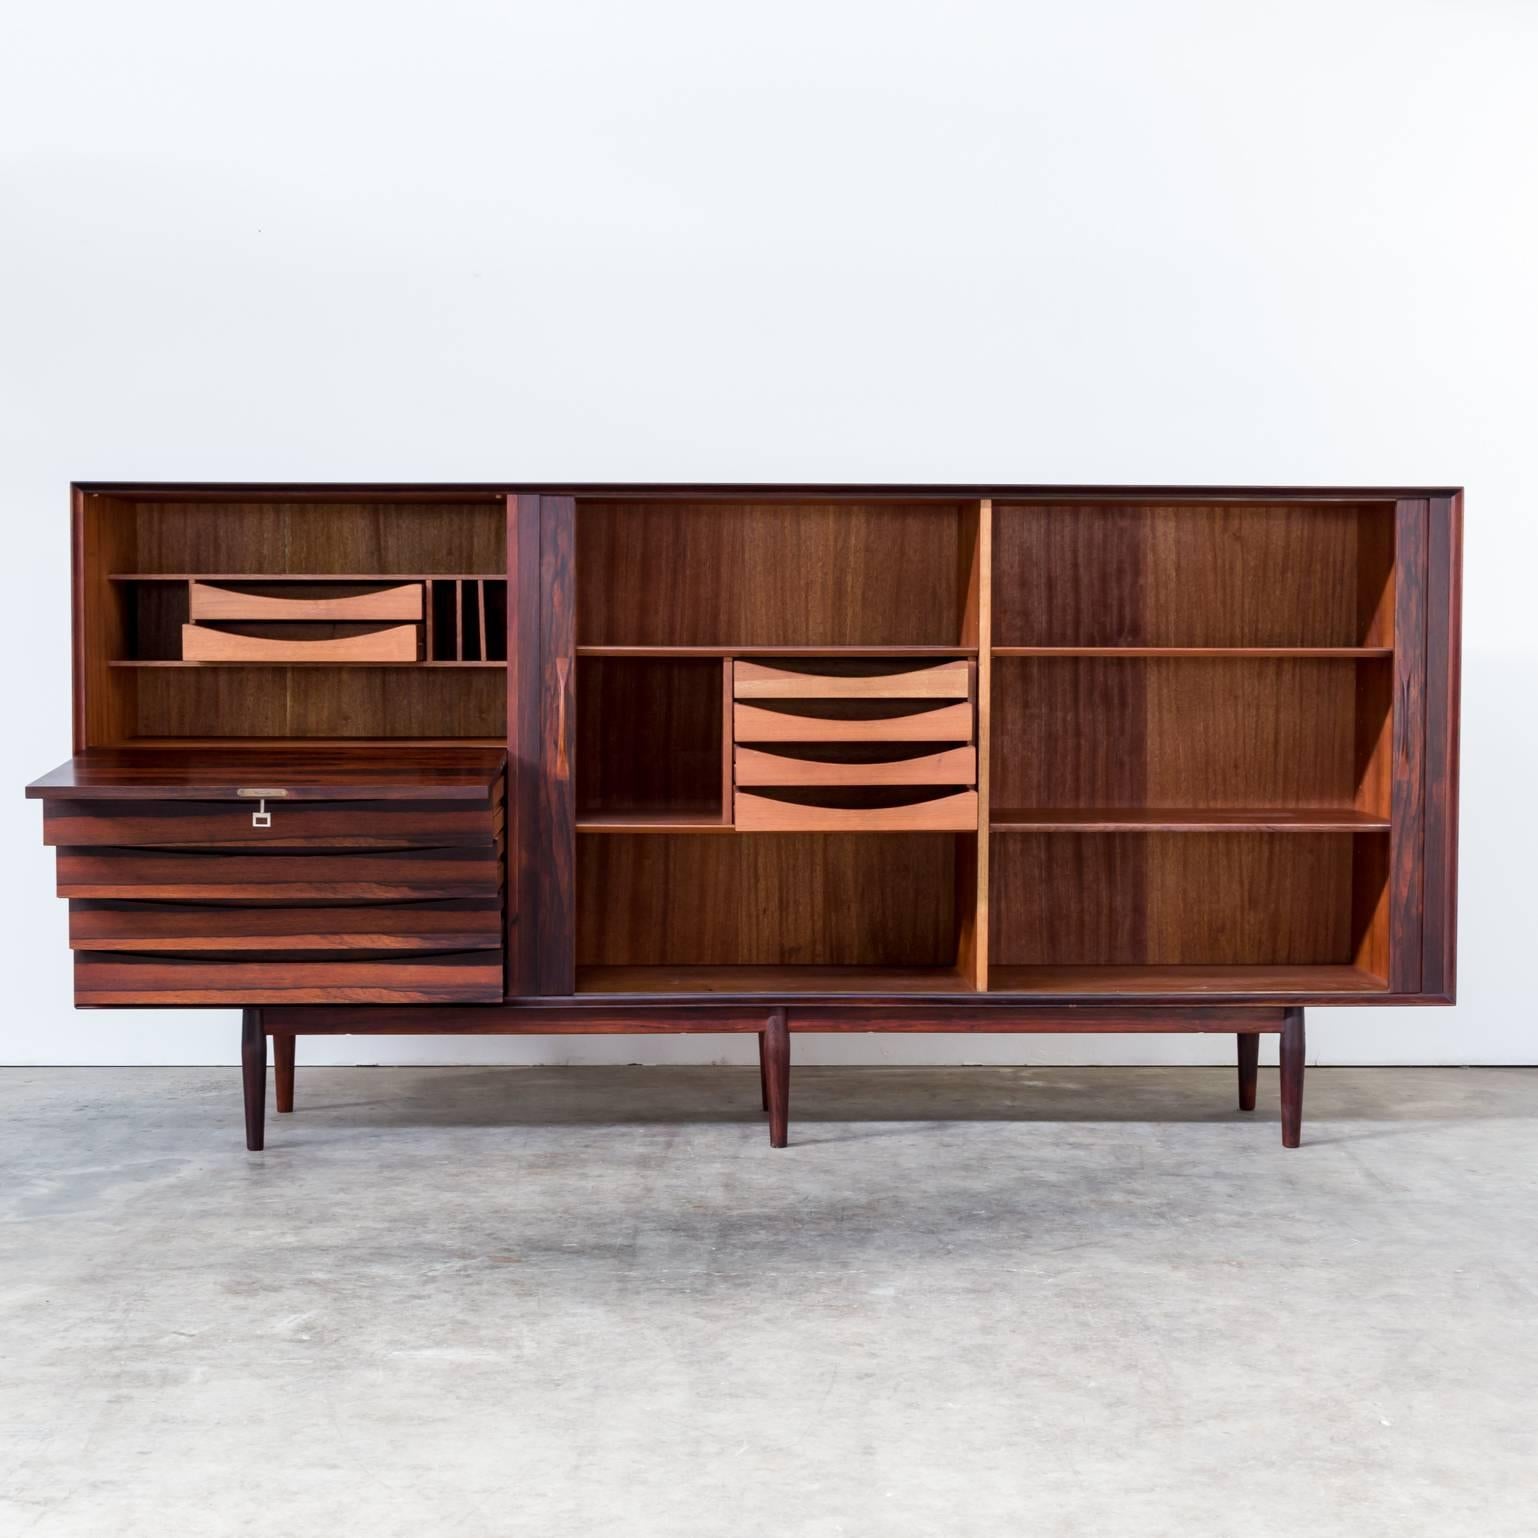 1960s Arne Vodder medium sideboard for Sibast. Very beautiful sideboard in good condition. The wood shows amazingly and the function of the sliding doors is very good. Minor spur of usage. Very good condition.